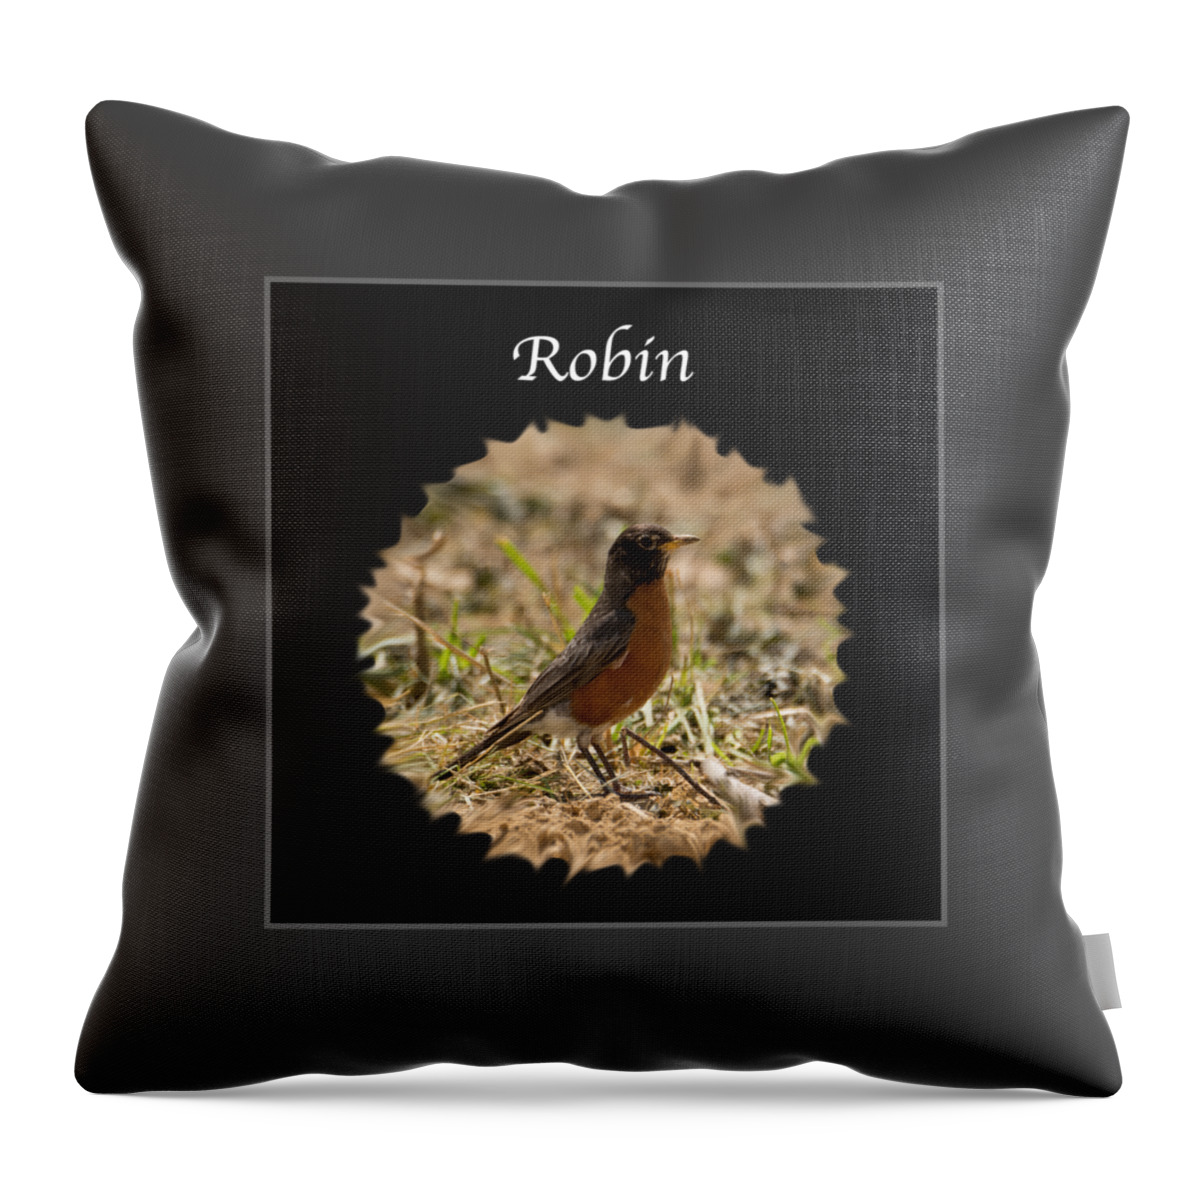 Robin Throw Pillow featuring the photograph Robin by Holden The Moment